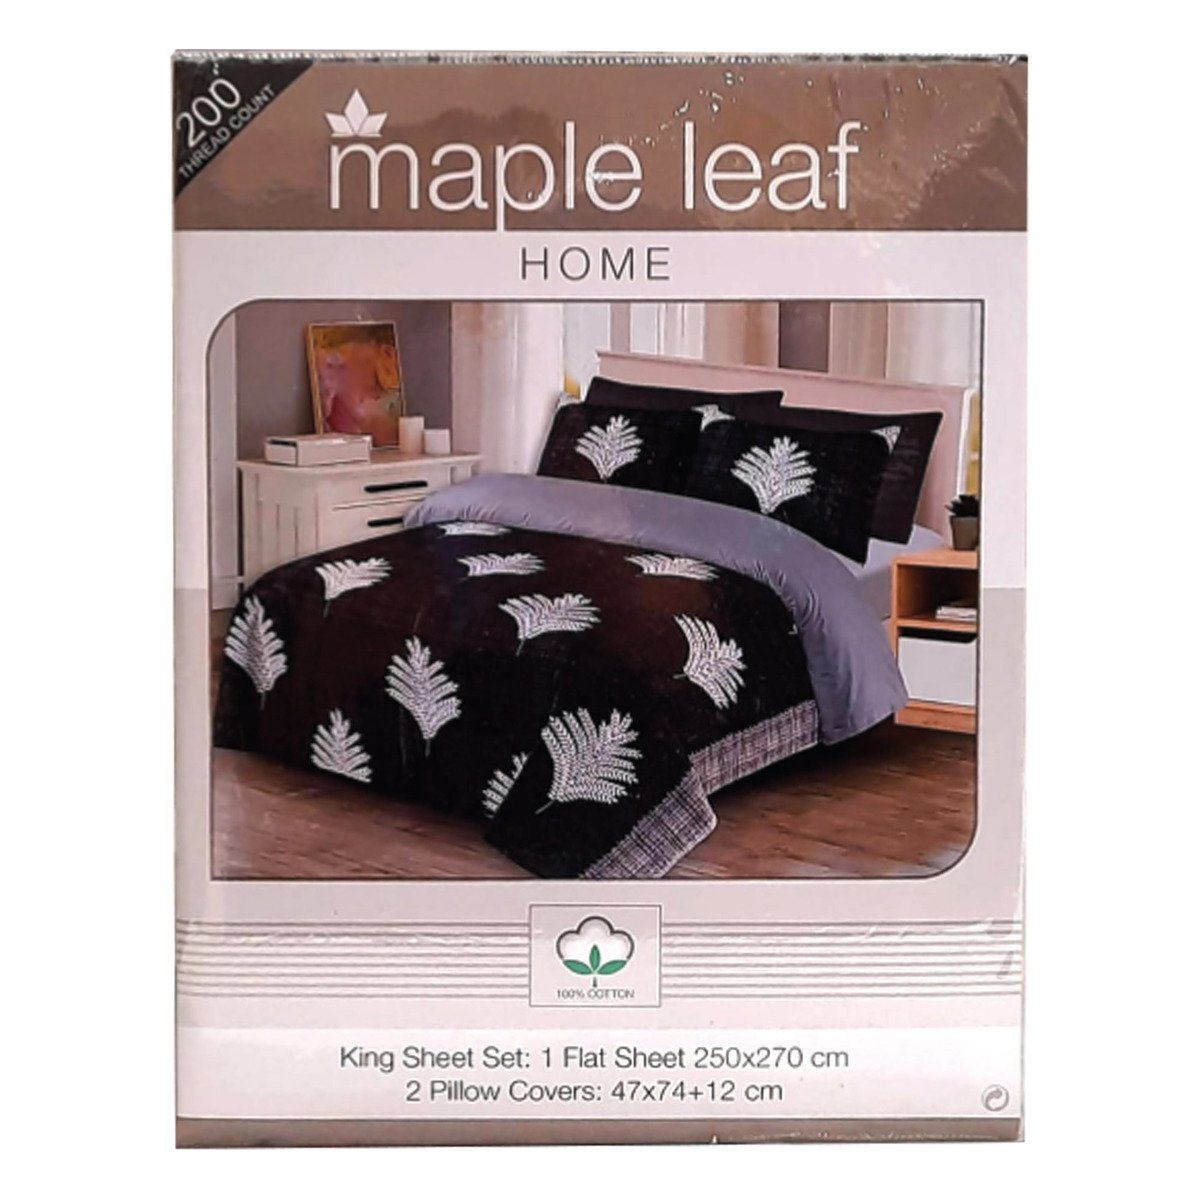 Maple Leaf Bed Sheet 250x270cm Assorted